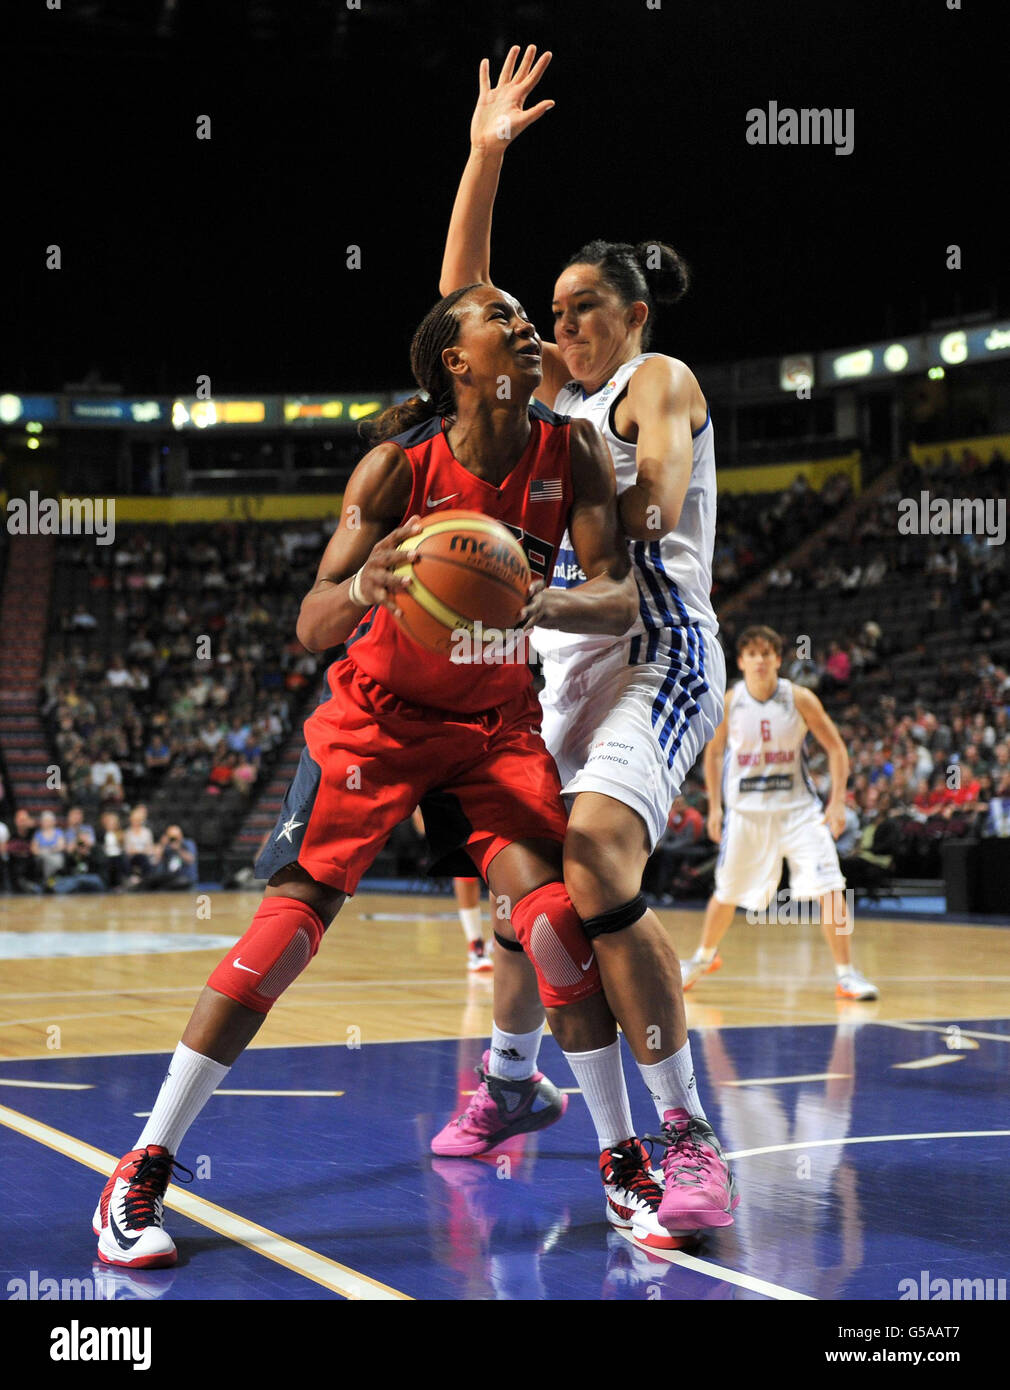 Basketball - Olympic Warm-Up Match - Great Britain's Women v USA's Women - Manchester Arena Stock Photo